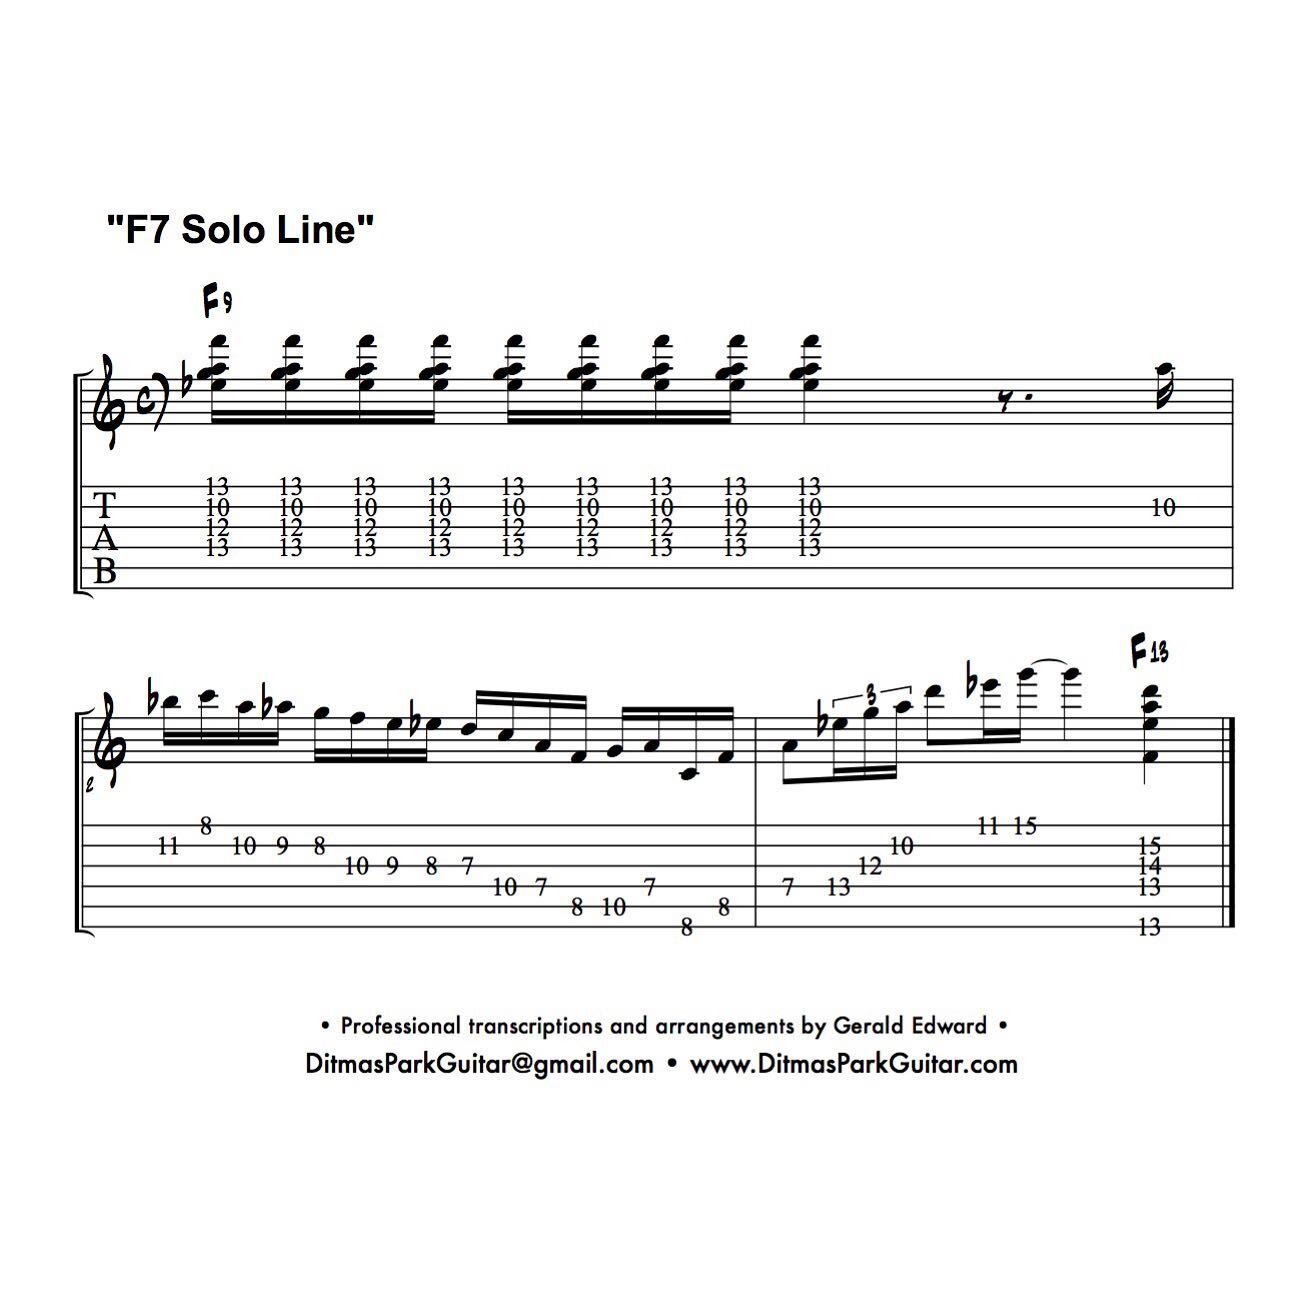 Here&rsquo;s a funky solo line that can be played over an F7 chord, using chromatic passing tones and arpeggios. 
.
.
.
.
.
#guitar #guitarlessons #guitarteacher #guitartabs #jazz #funk #ditmasparkguitar #music #learnsomethingneweveryday